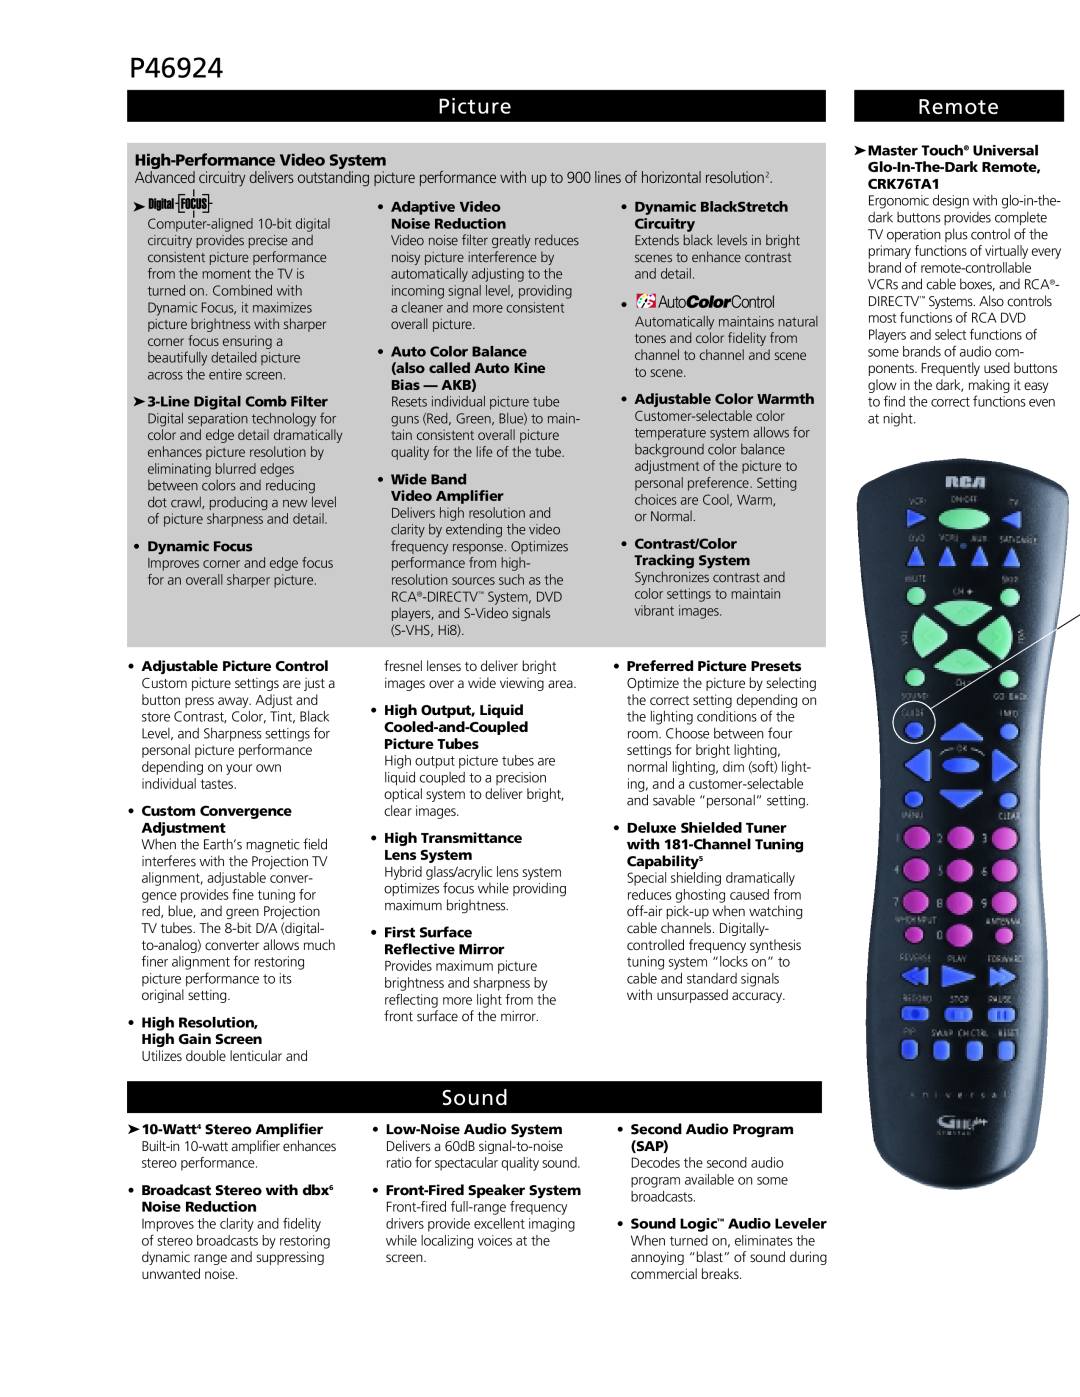 RCA P46924 manual Picture, Remote, Sound, High-Performance Video System 